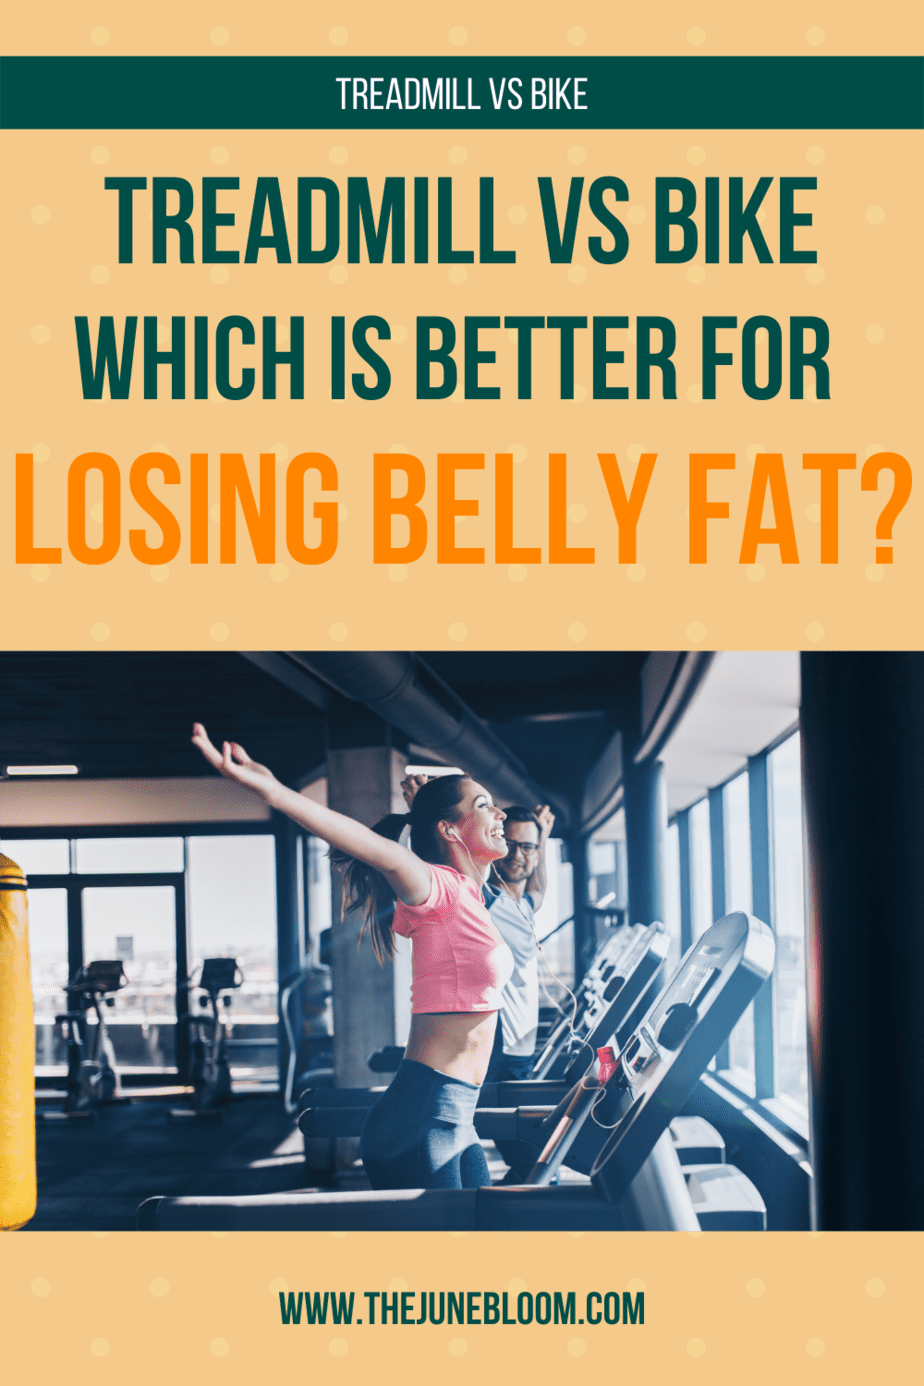 Is bike or treadmill better for losing belly fat